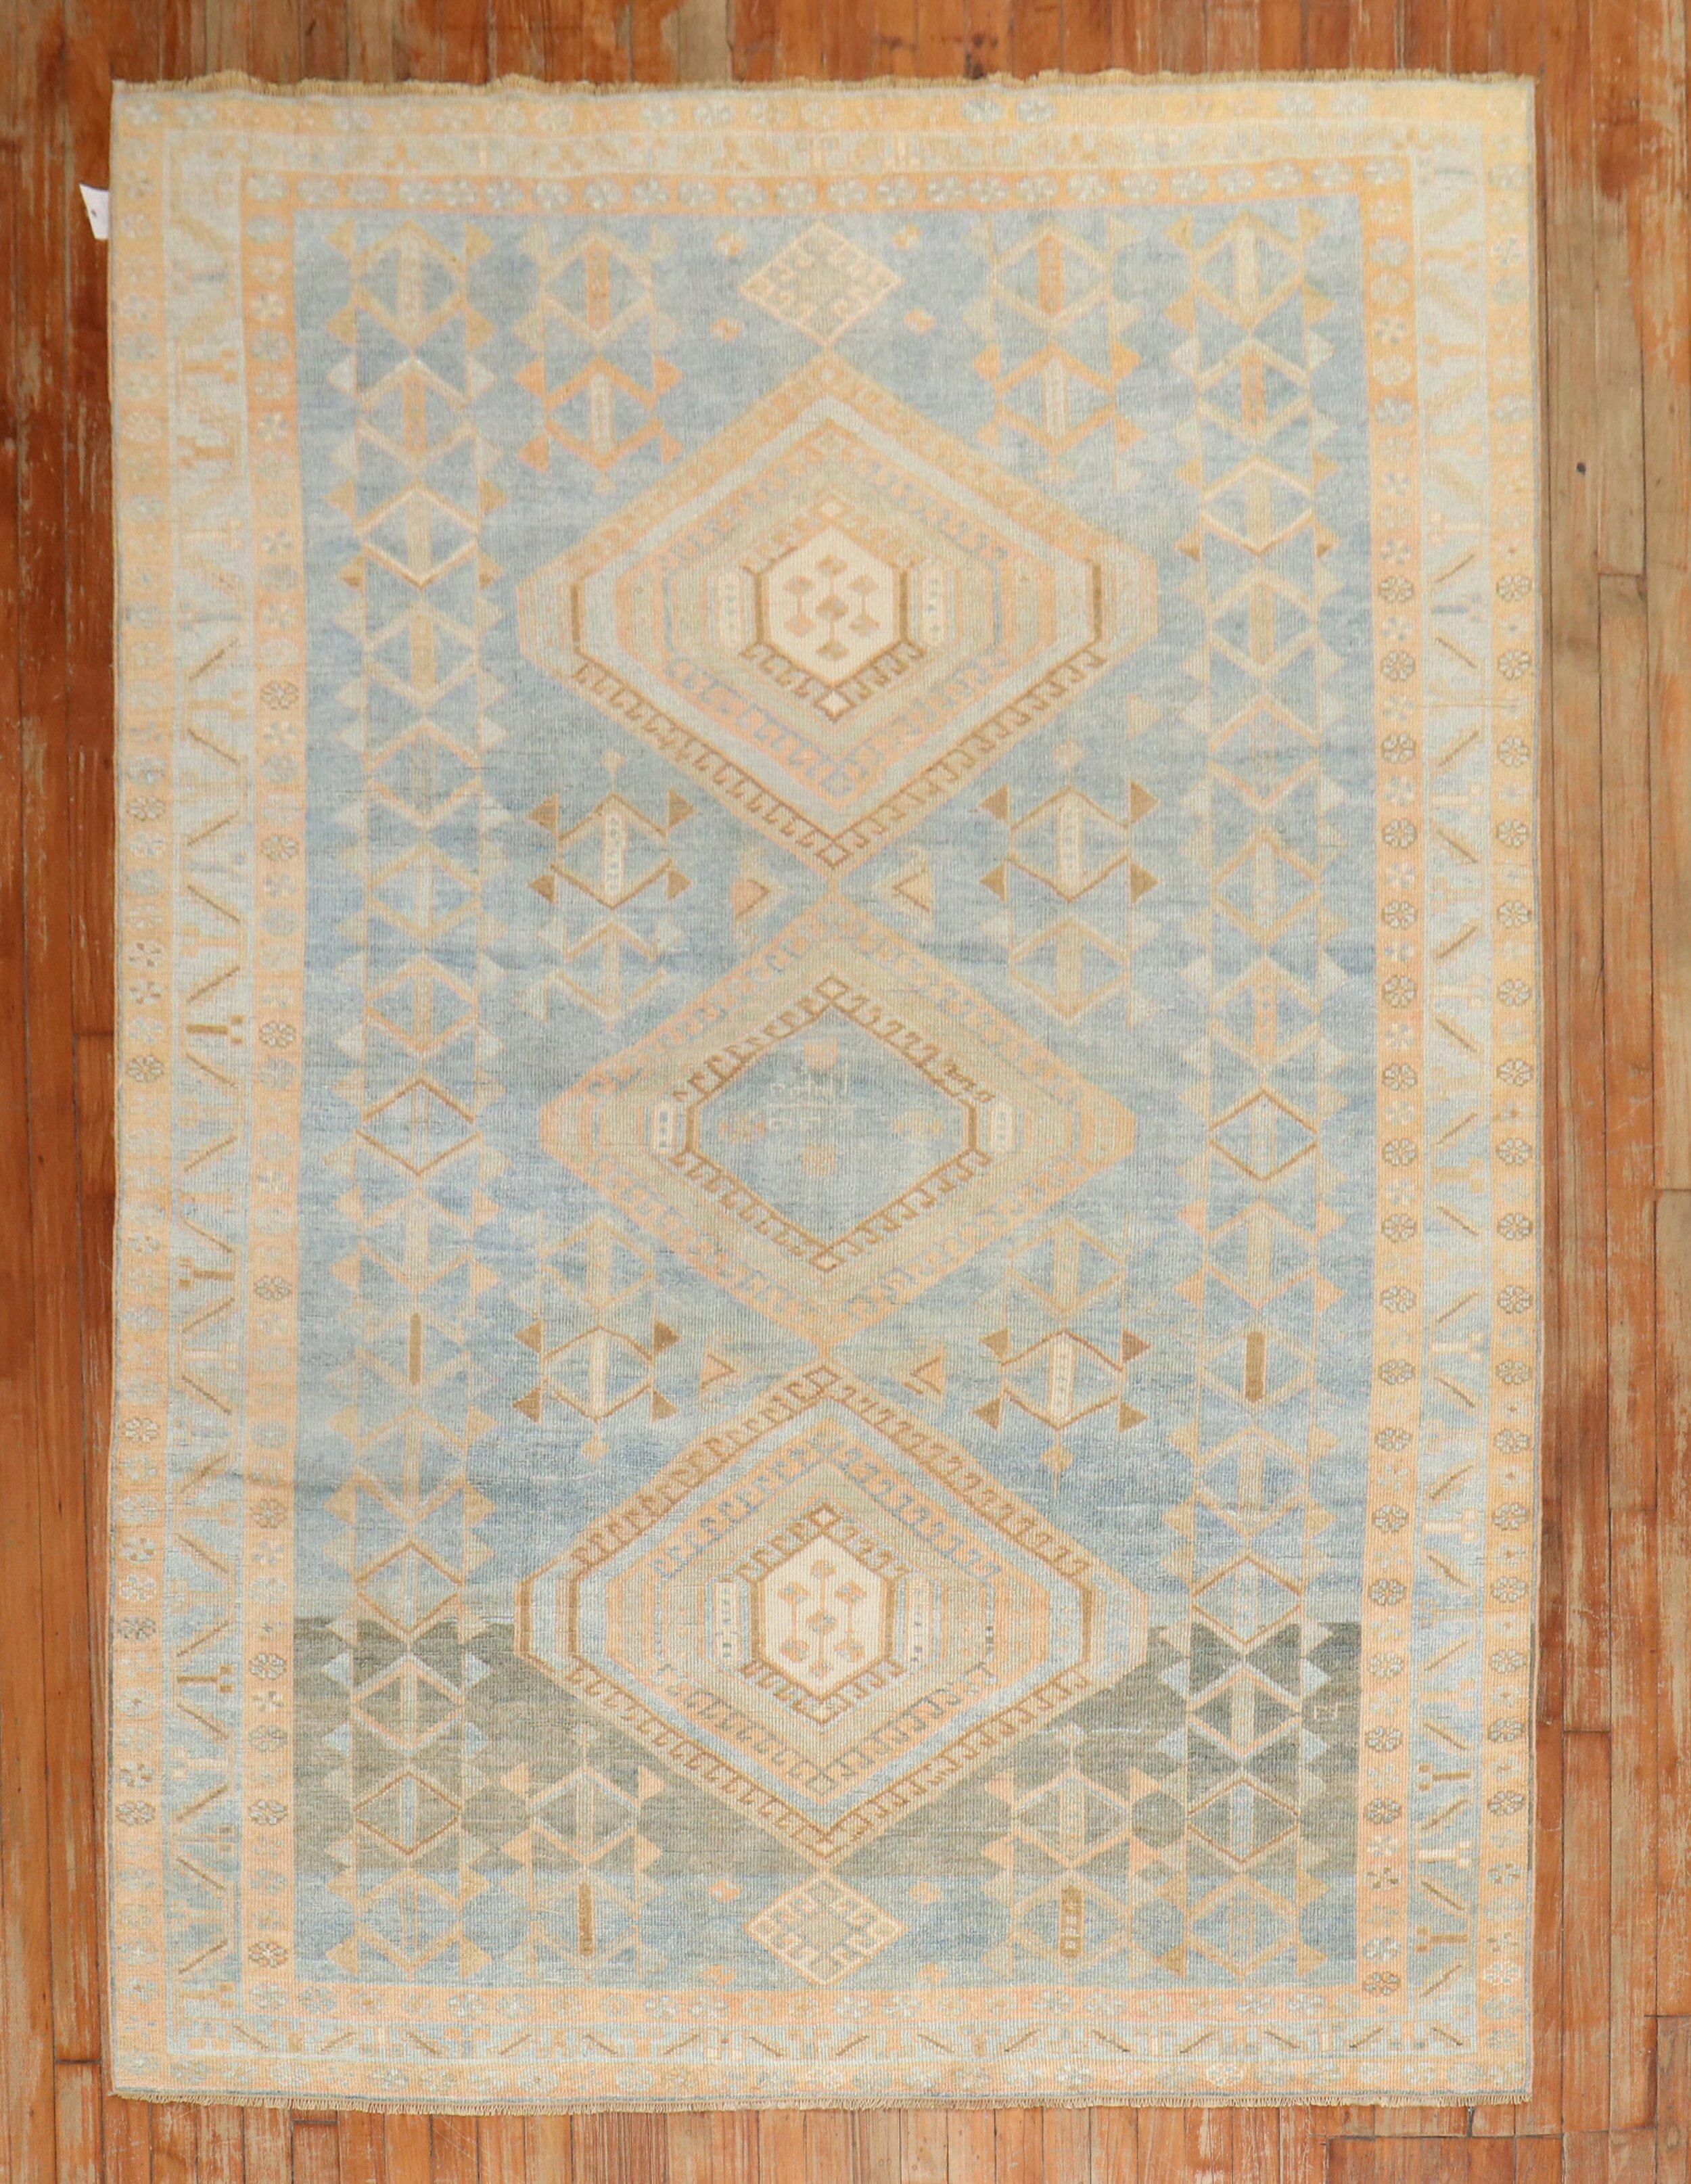 An early 20th century Persian Malayer tribal small room size rug in predominantly light blue

Measures: 5'9